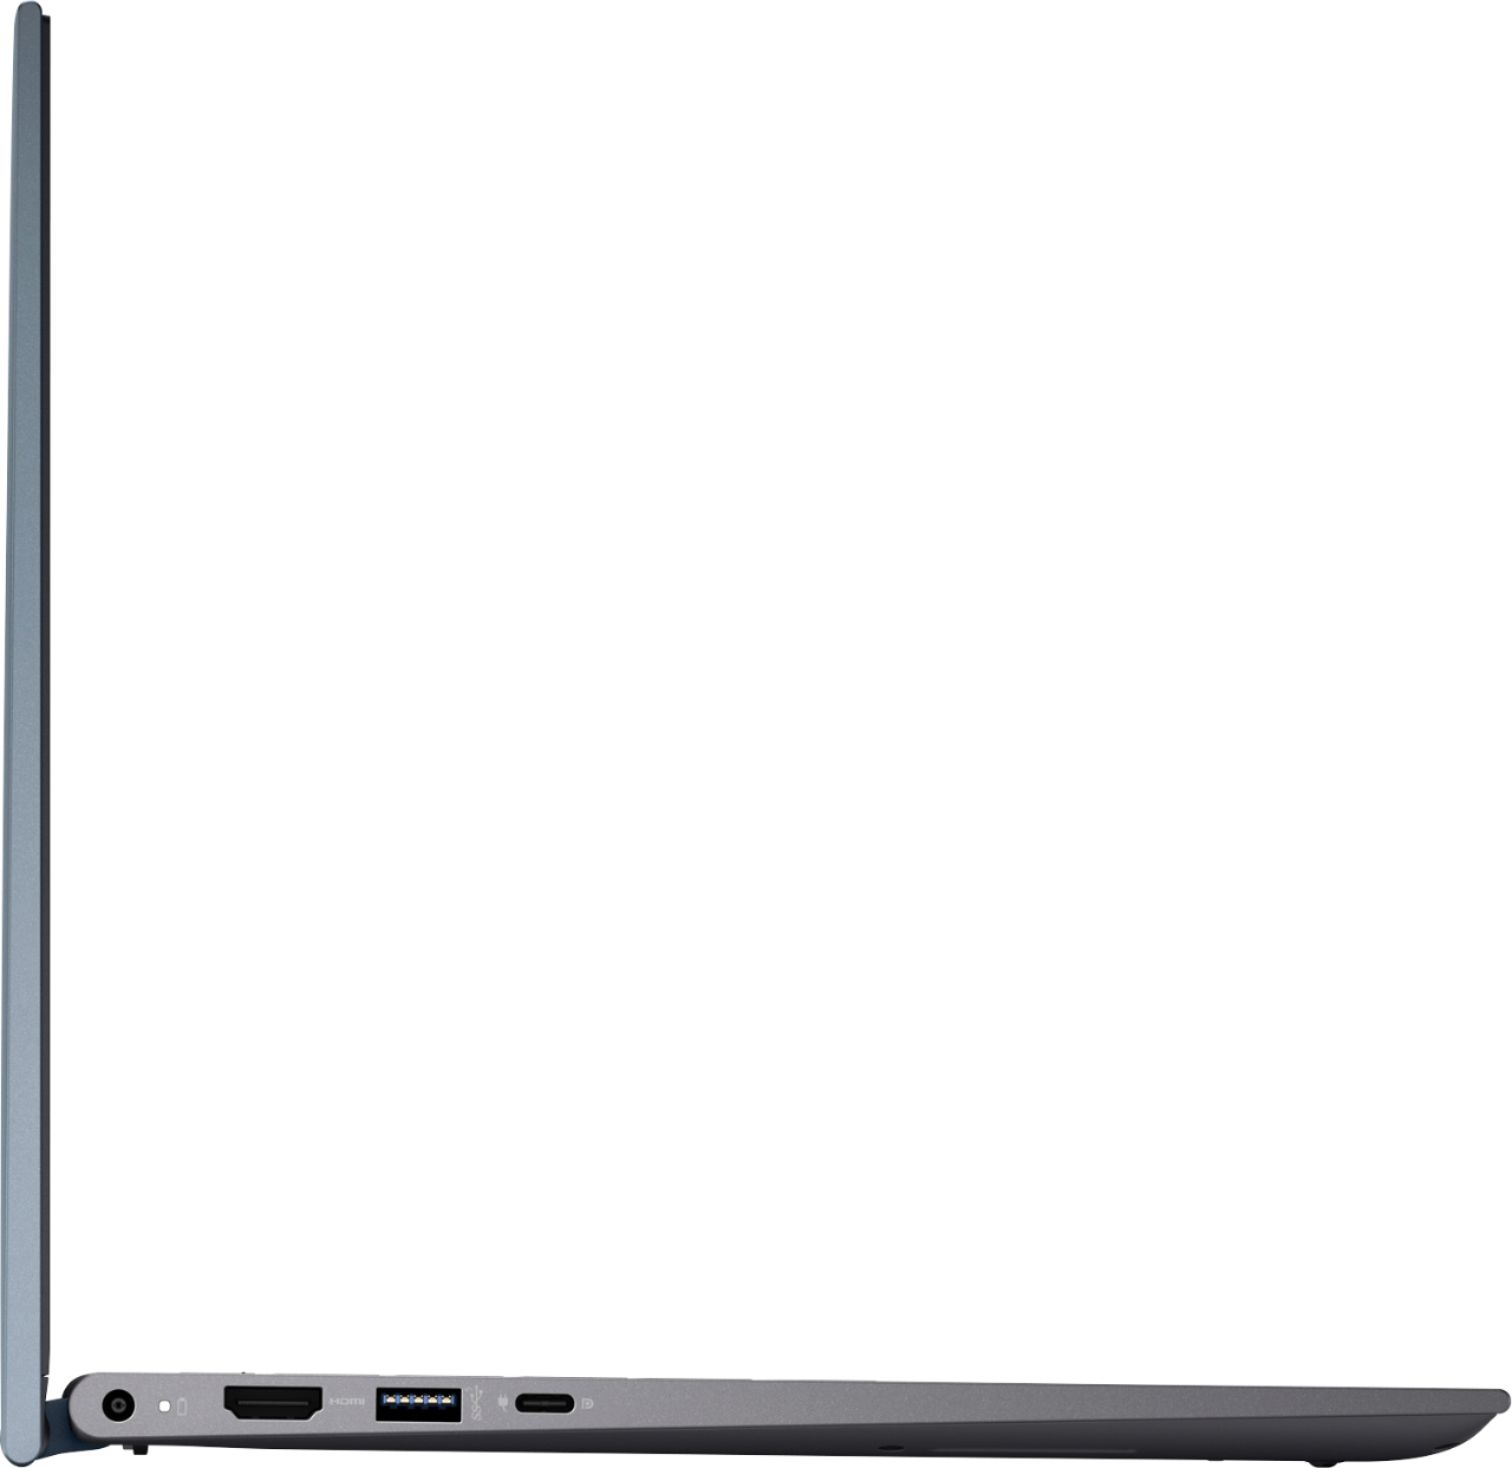 Angle View: Dell - Inspiron 7000 2-in-1 14.0" Touch-Screen Laptop - AMD Ryzen 7 - 16GB Memory - 512GB Solid State Drive - Blue